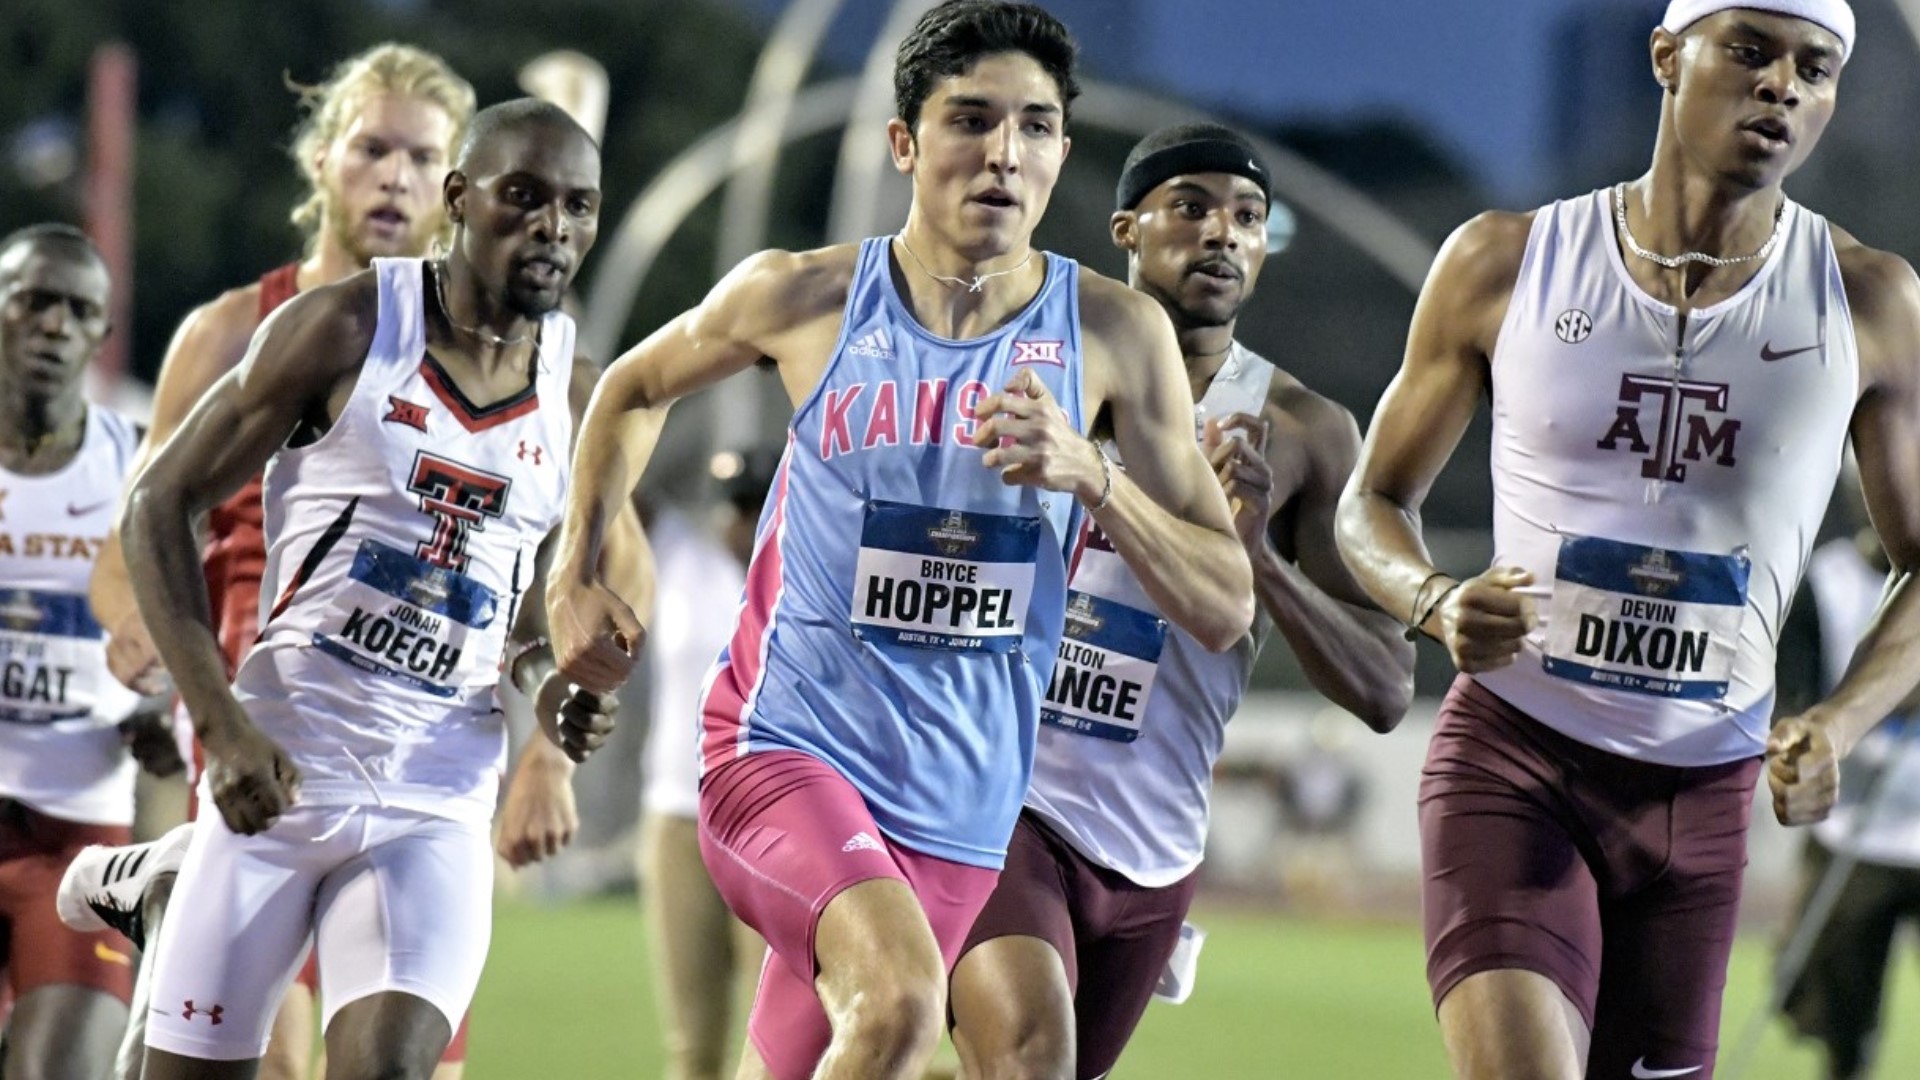 Bryce Hoppel will look to earn one of three spots on the men's 800-meter olympic squad.